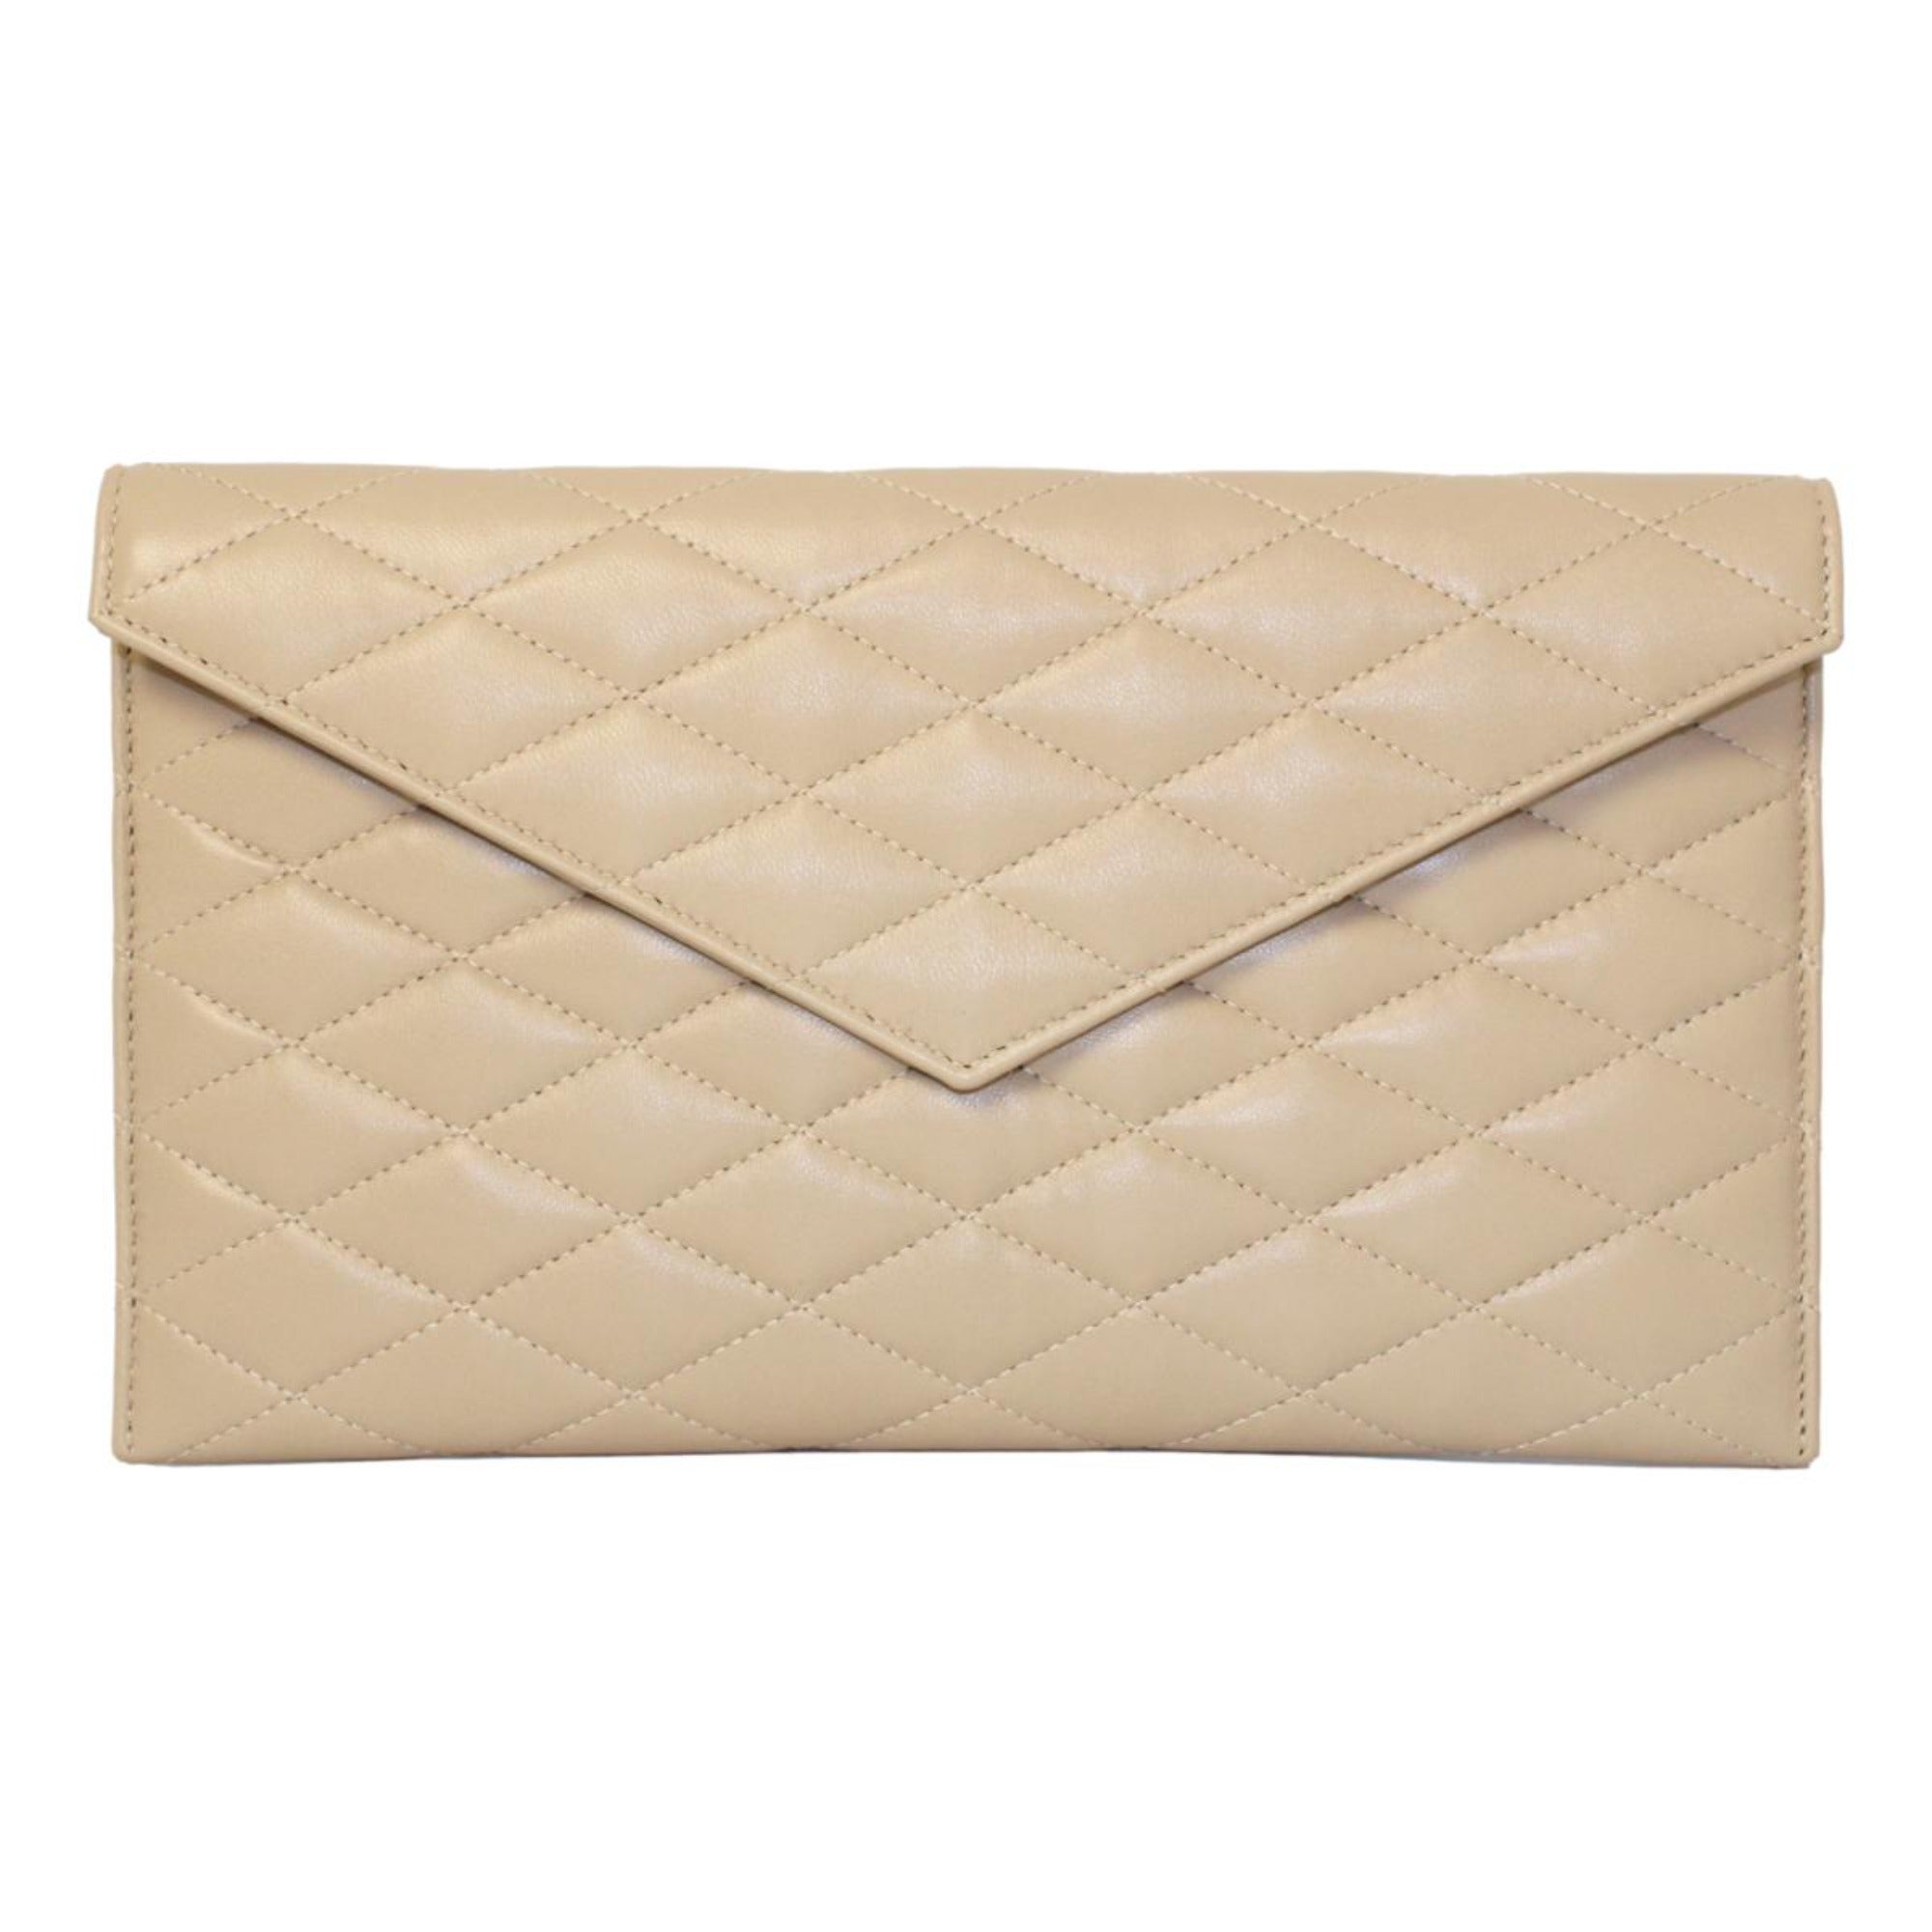 Saint Laurent Sade Logo Beige Leather Quiltled Pouch Clutch Bag 636533 at_Queen_Bee_of_Beverly_Hills